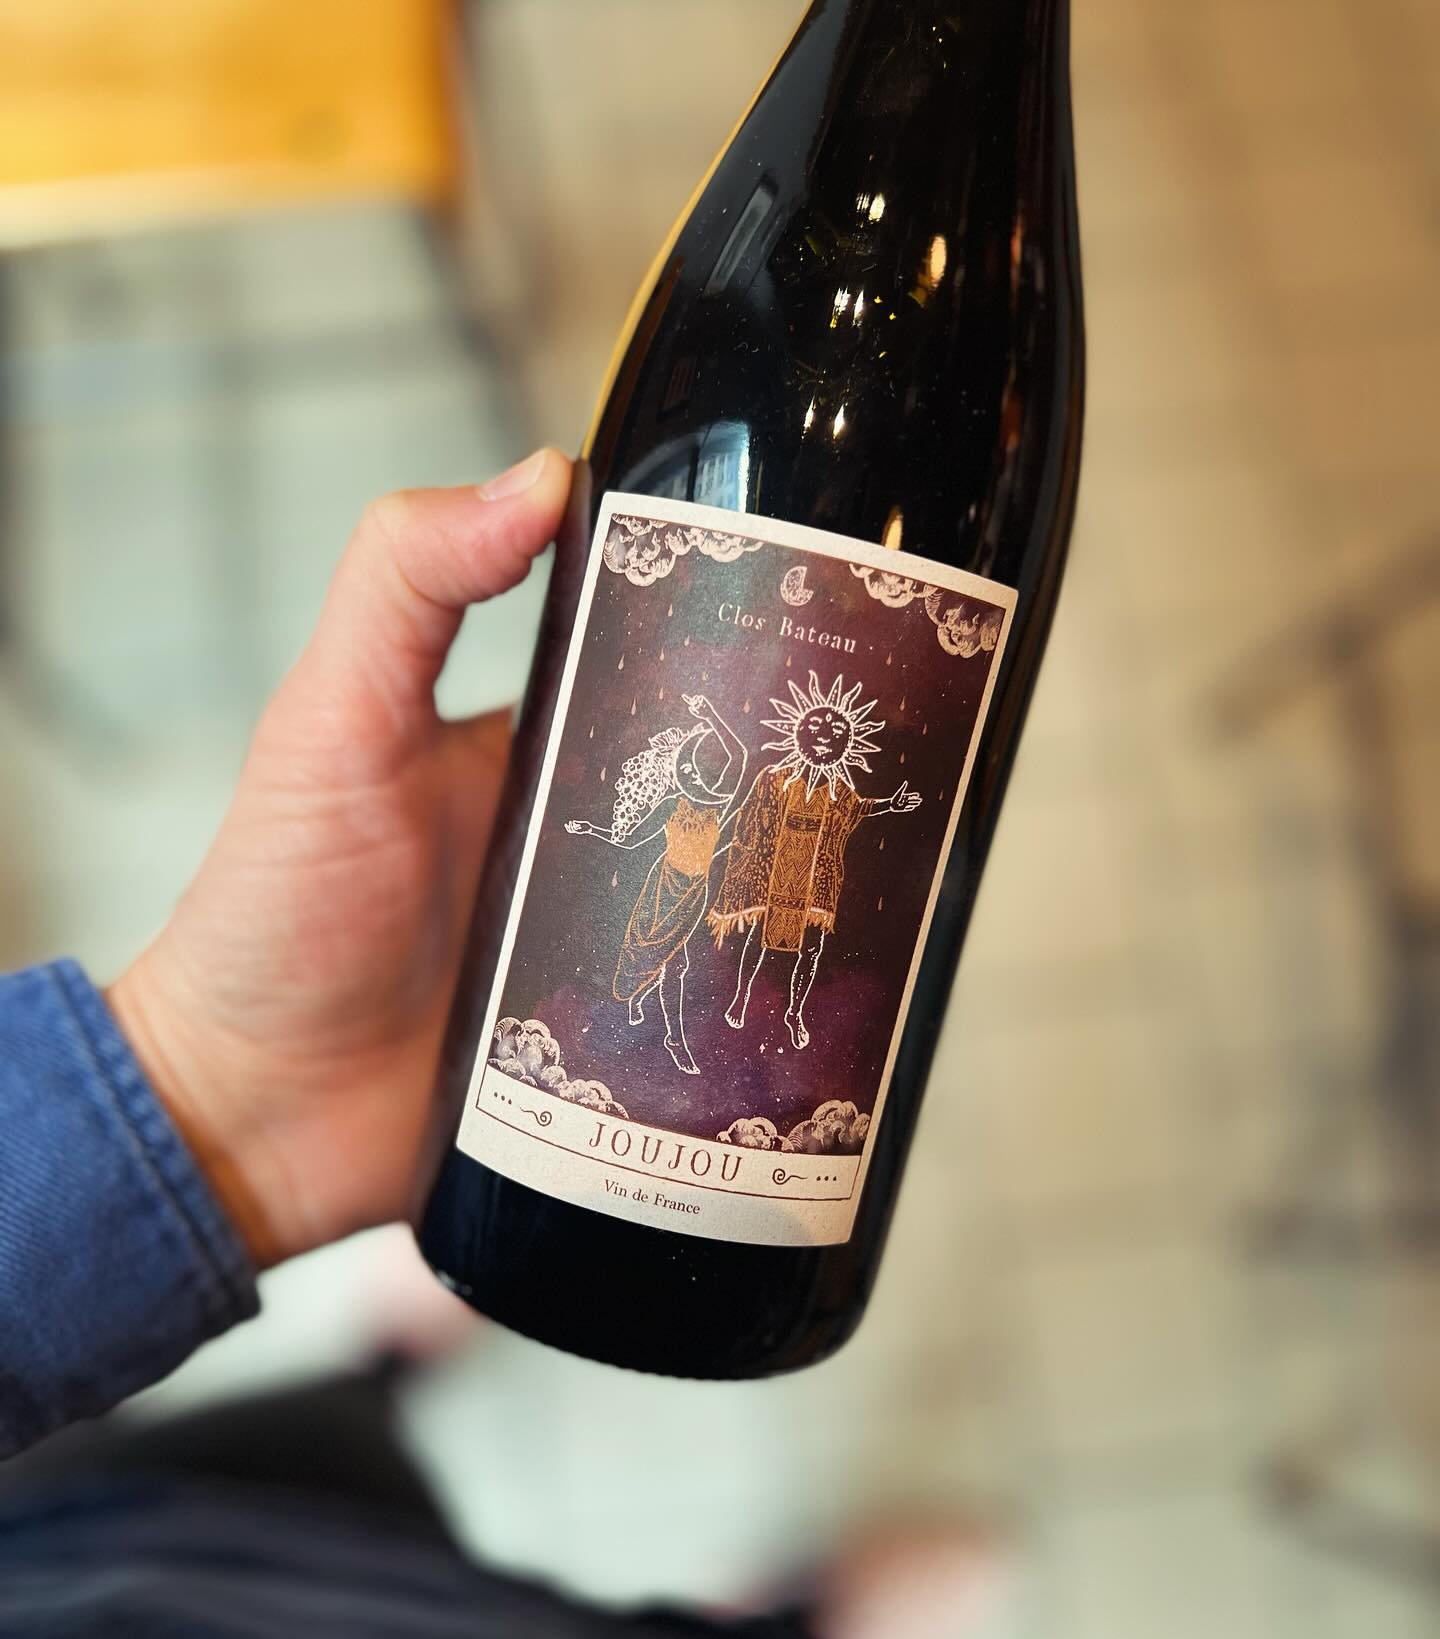 Carbonic, raspberry air anyone???? 

It's FINALLY feeling a little like Spring so let's pull out all the #wildchild wines and let them #shinebabyshine. 💯 &quot;Jou Jou &quot;Gamay from the lovely couple behind @closbateau in Beaujolais- it's ripping